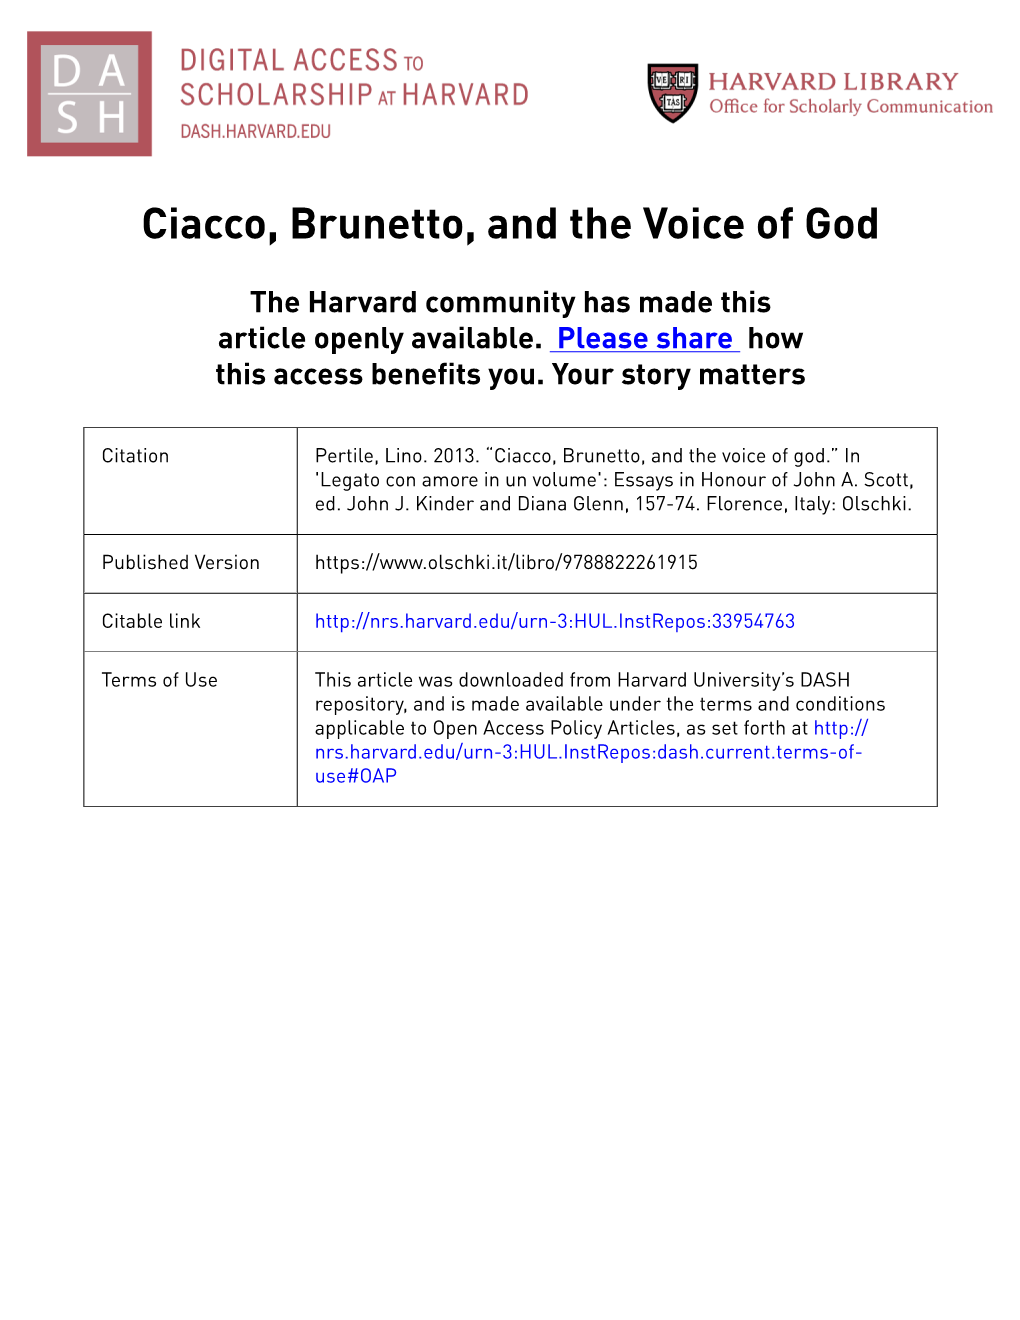 Ciacco, Brunetto and the Voice of God.Pdf (113.5Kb)